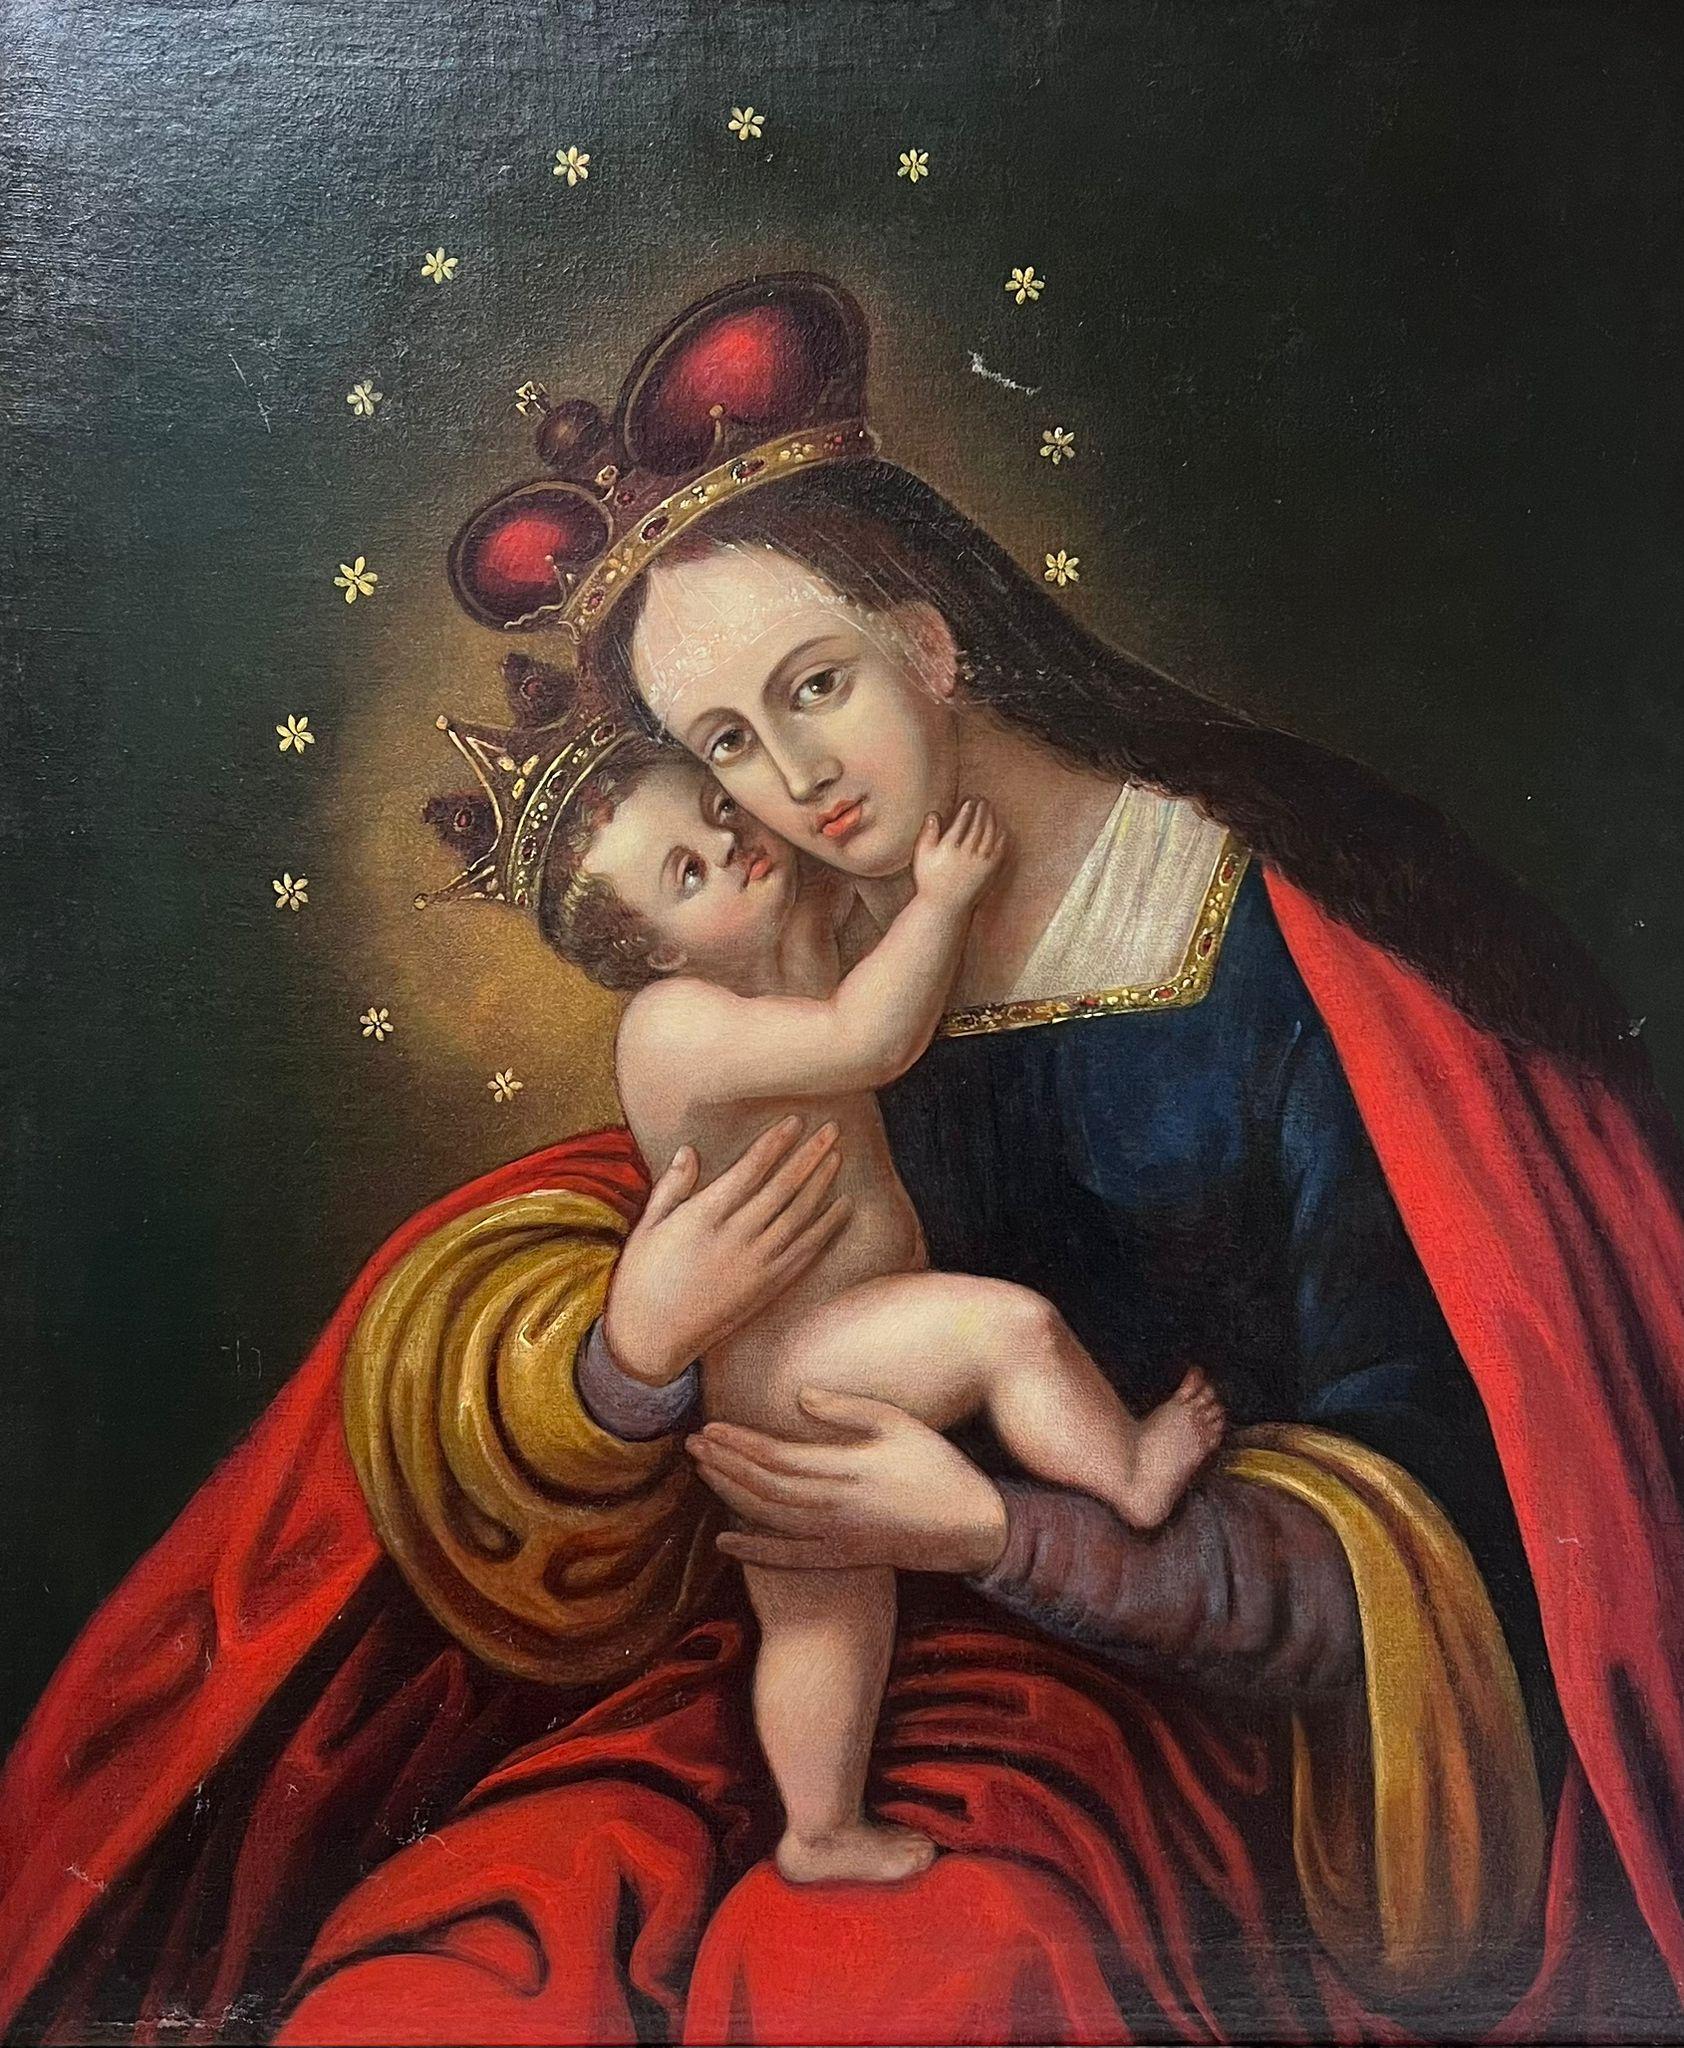 Eastern European Old Master Figurative Painting - 1800's Old Master Oil Painting Portrait of the Madonna & Christ Child 